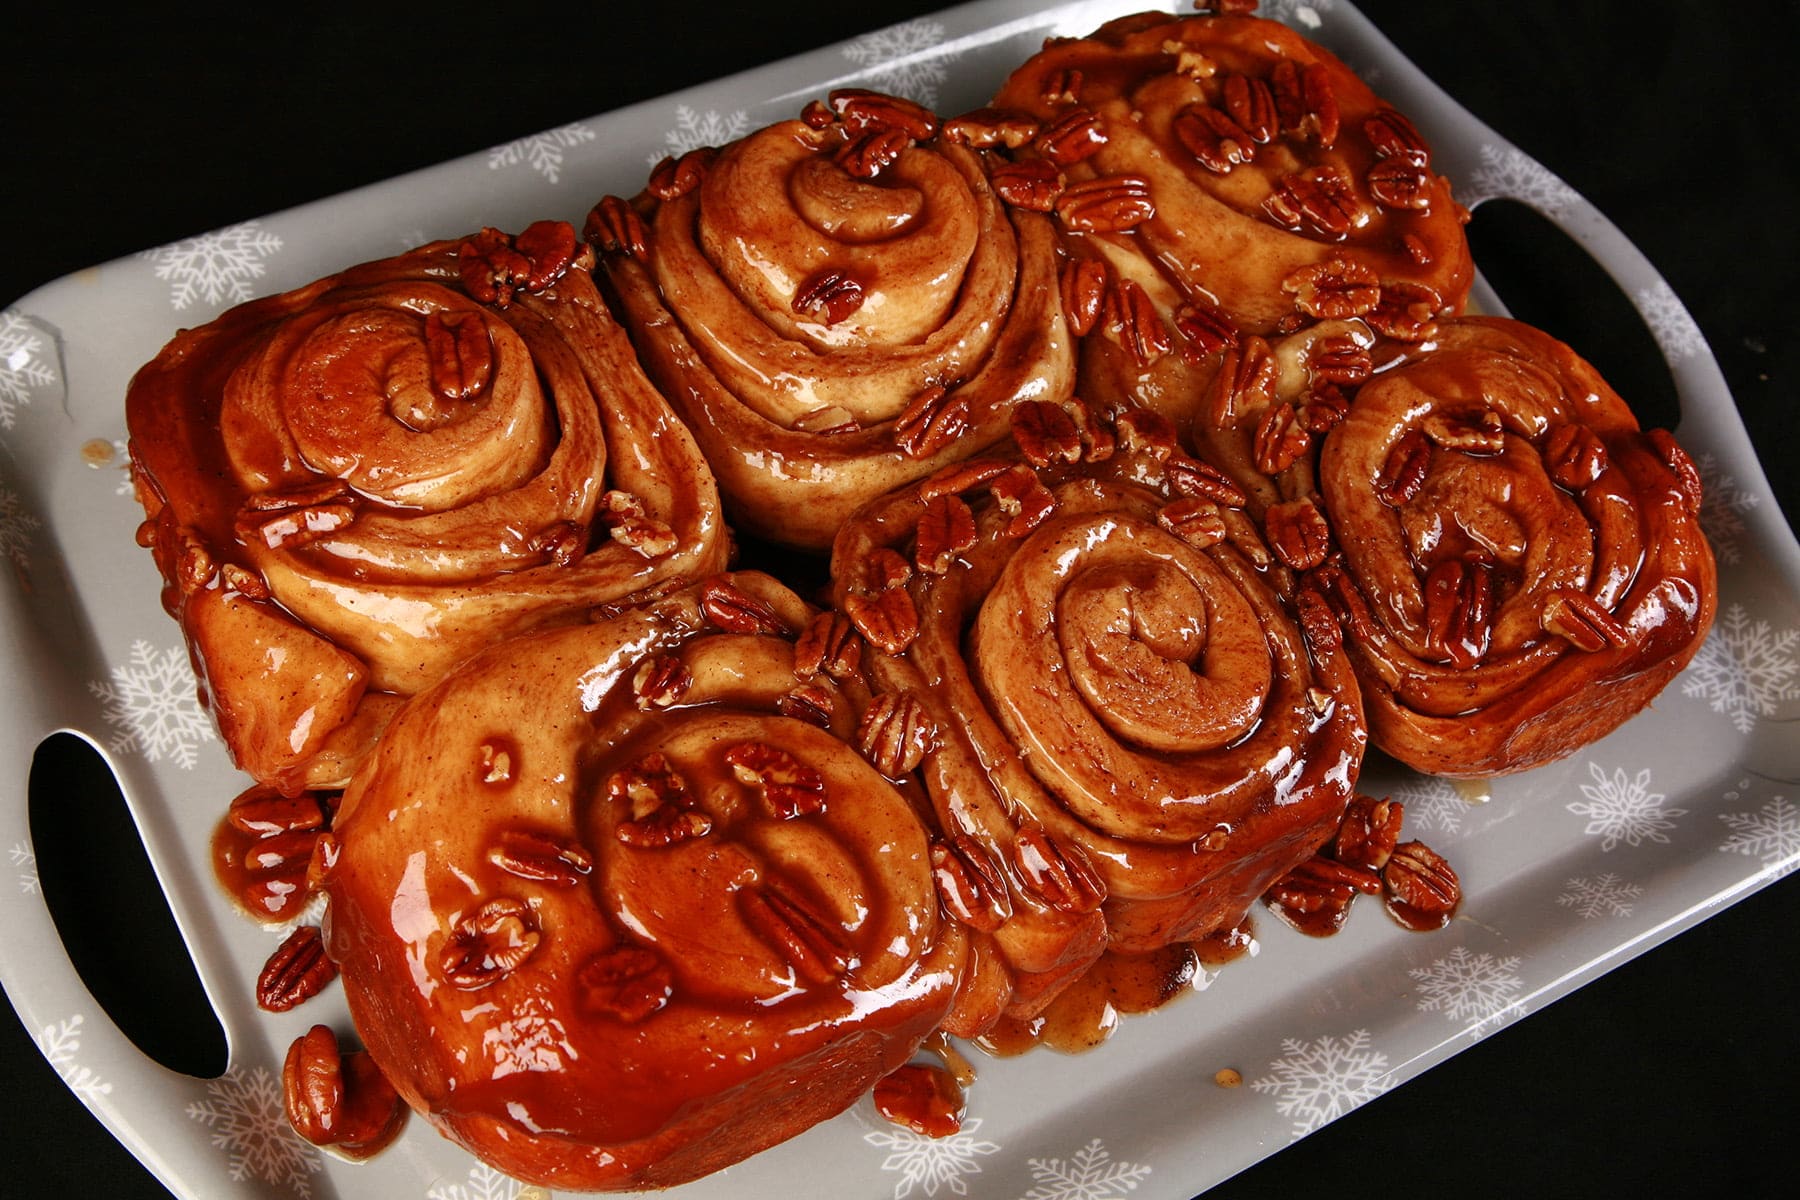 A close up view of a slab of 6 egg nog sticky buns. They are dripping with caramel and pecans.